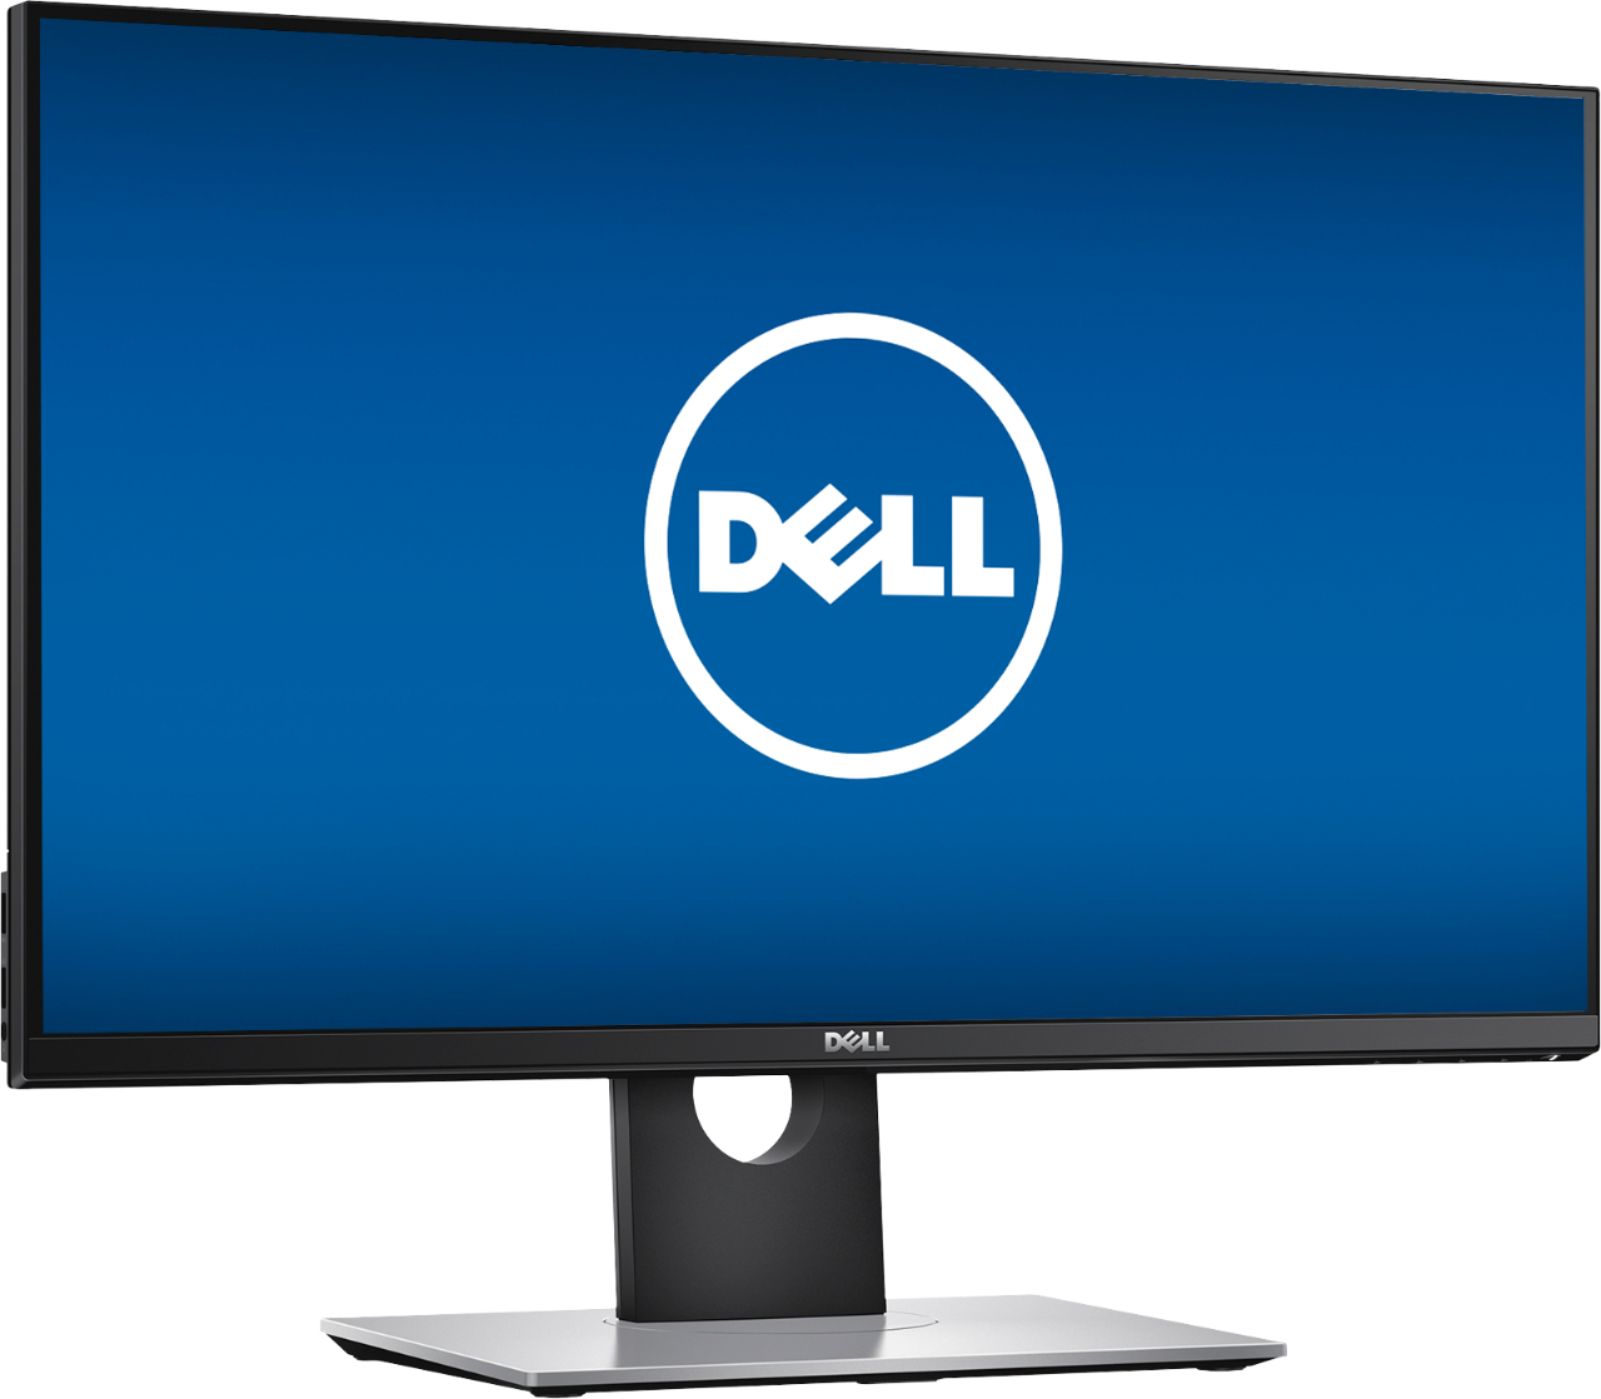 Angle View: Dell - Geek Squad Certified Refurbished 27" LED QHD GSync Monitor - Black